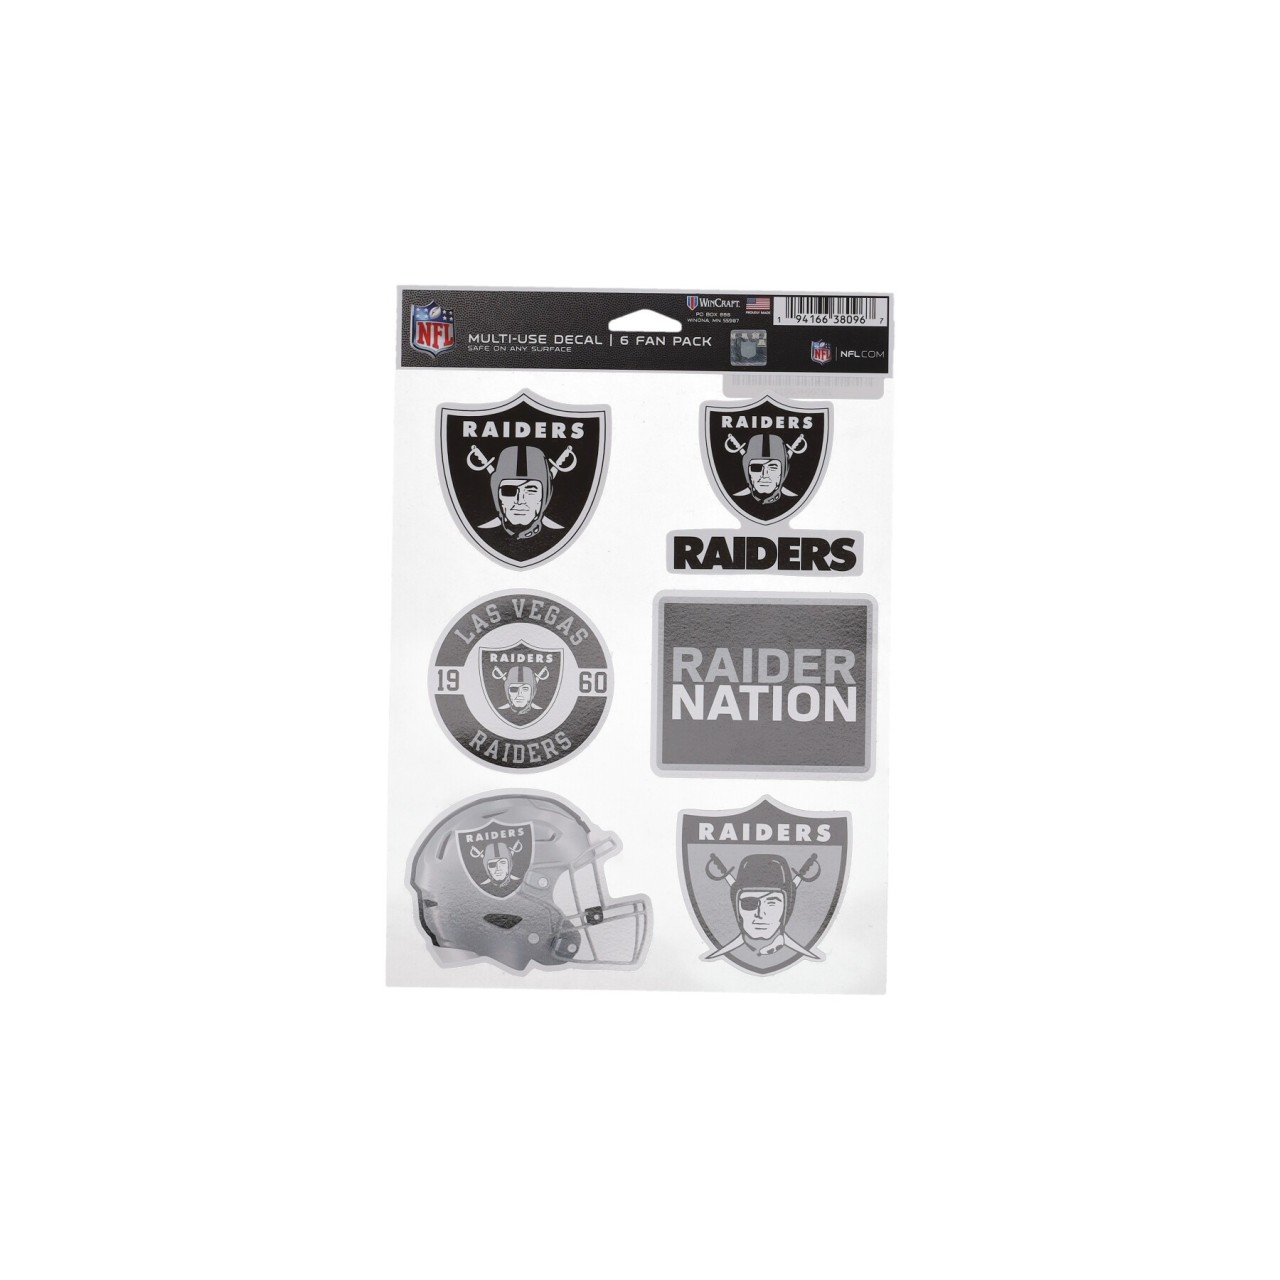 WINCRAFT NFL 5.5 x 7.75” FAN PACK DECALS LAVRAI 38096321